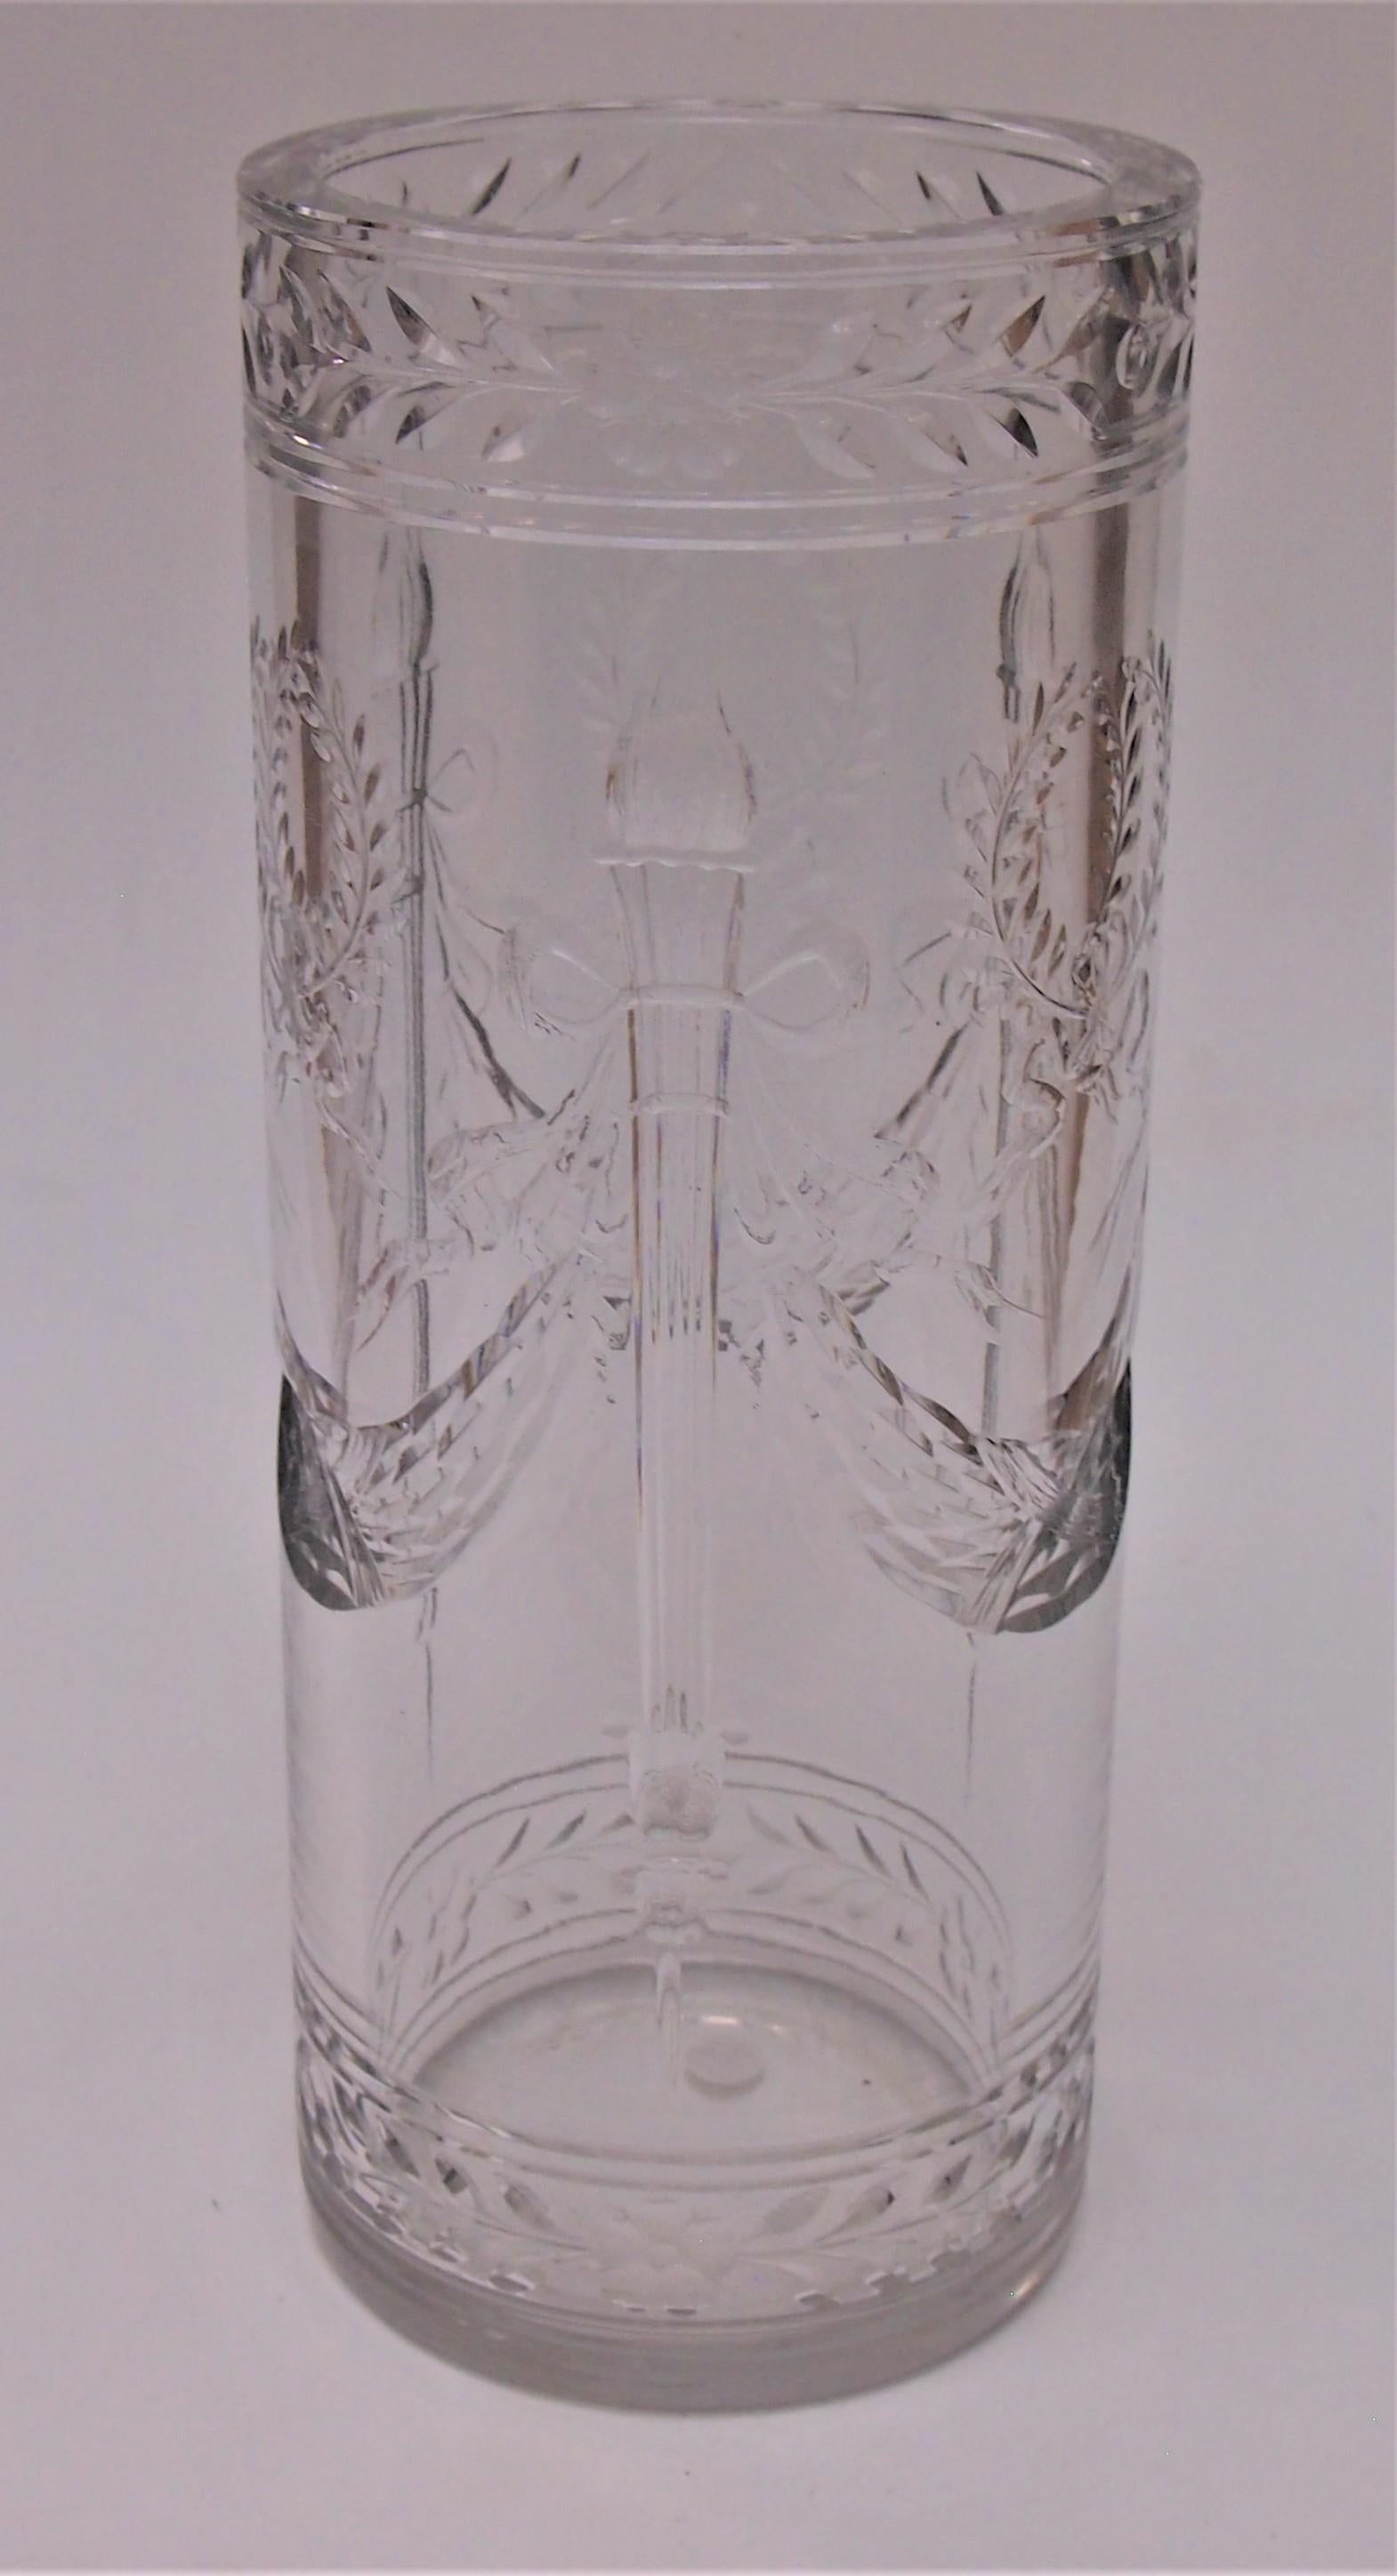 Neoclassical Revival French Baccarat Deeply Cut Crystal Glass 'Arcole' Vase, Napoleon Centenary 1904 For Sale